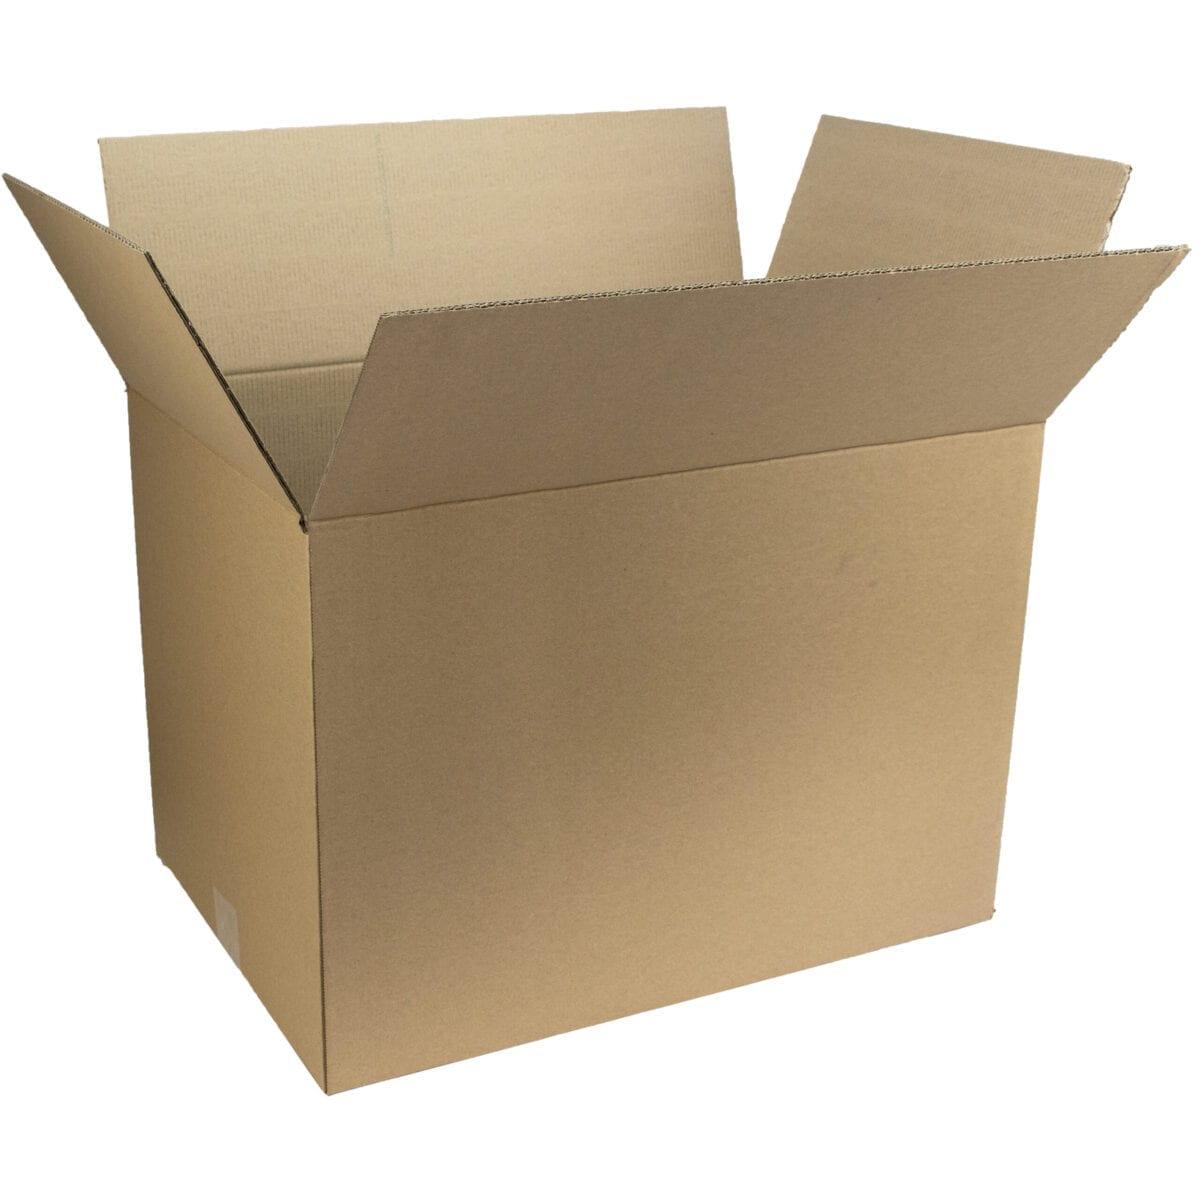 Product Buy 483x324x333mm Double Wall Box - Packaging Supplies image